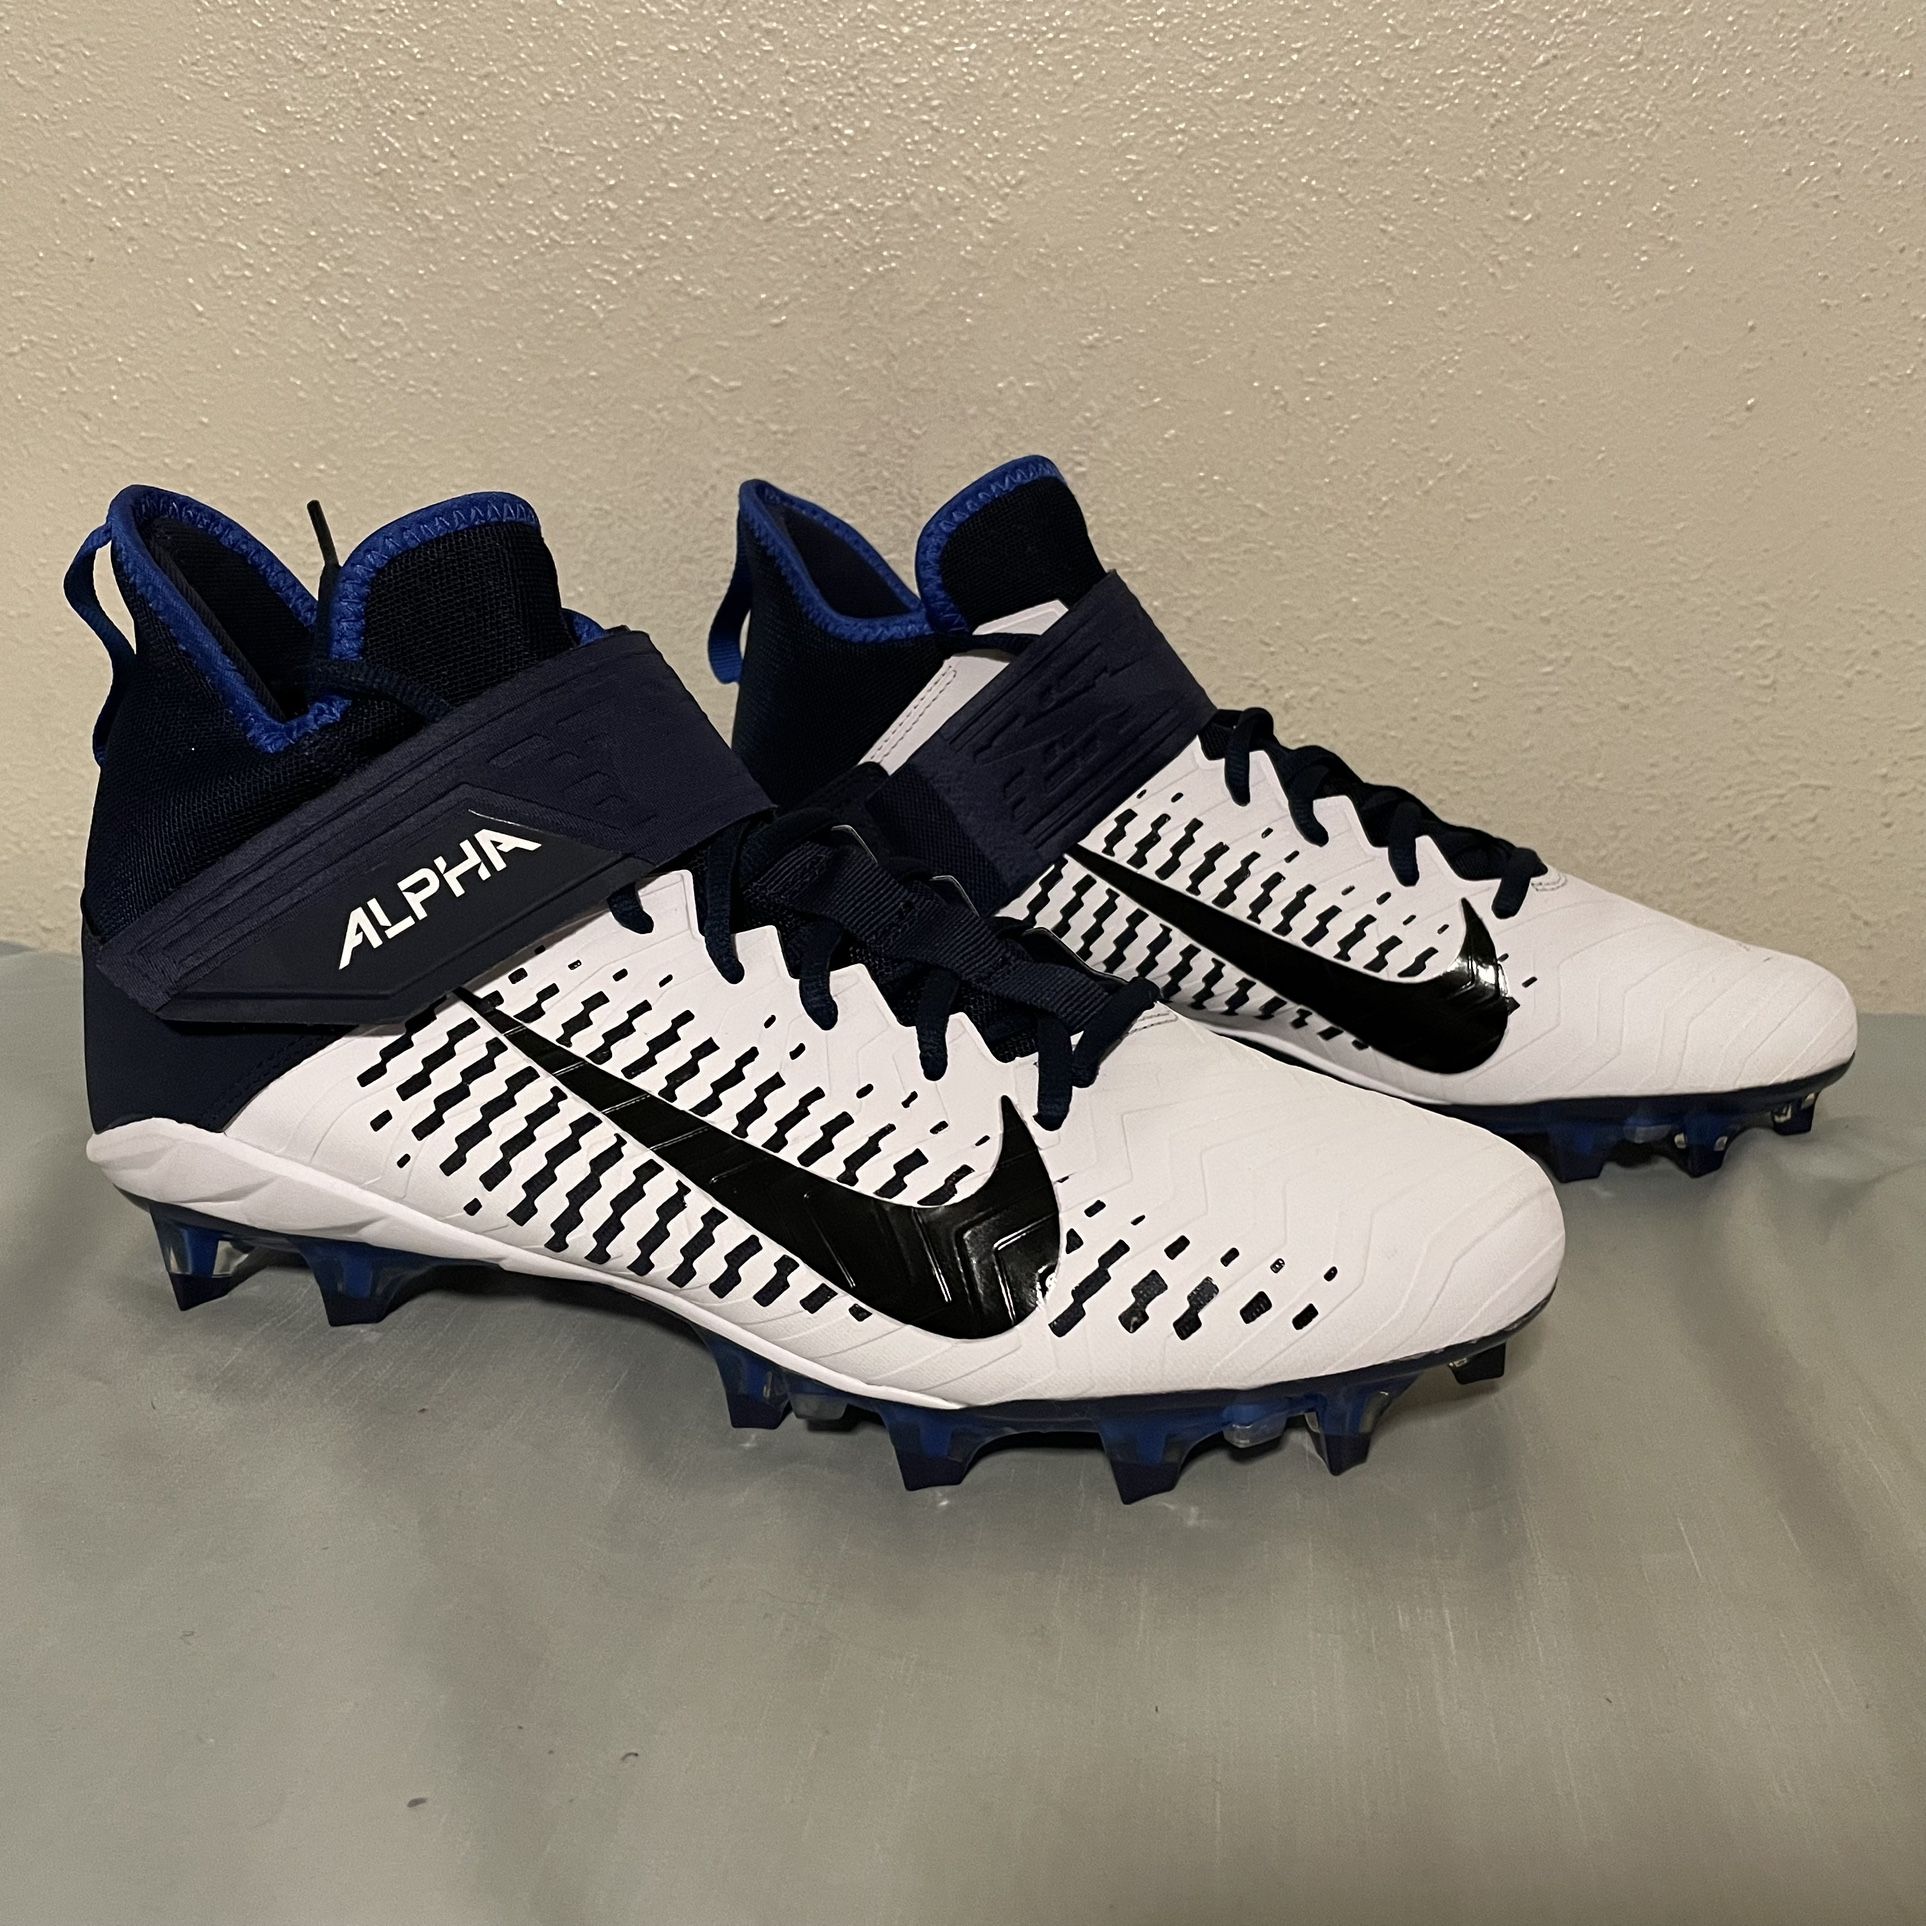 🏈 Nike Men's Alpha Menace Pro 2 Mid White/Navy Football Cleats     NFL          [SIZE 11.5]         PRICE NEGOTIABLE     MAKE AN OFFER 